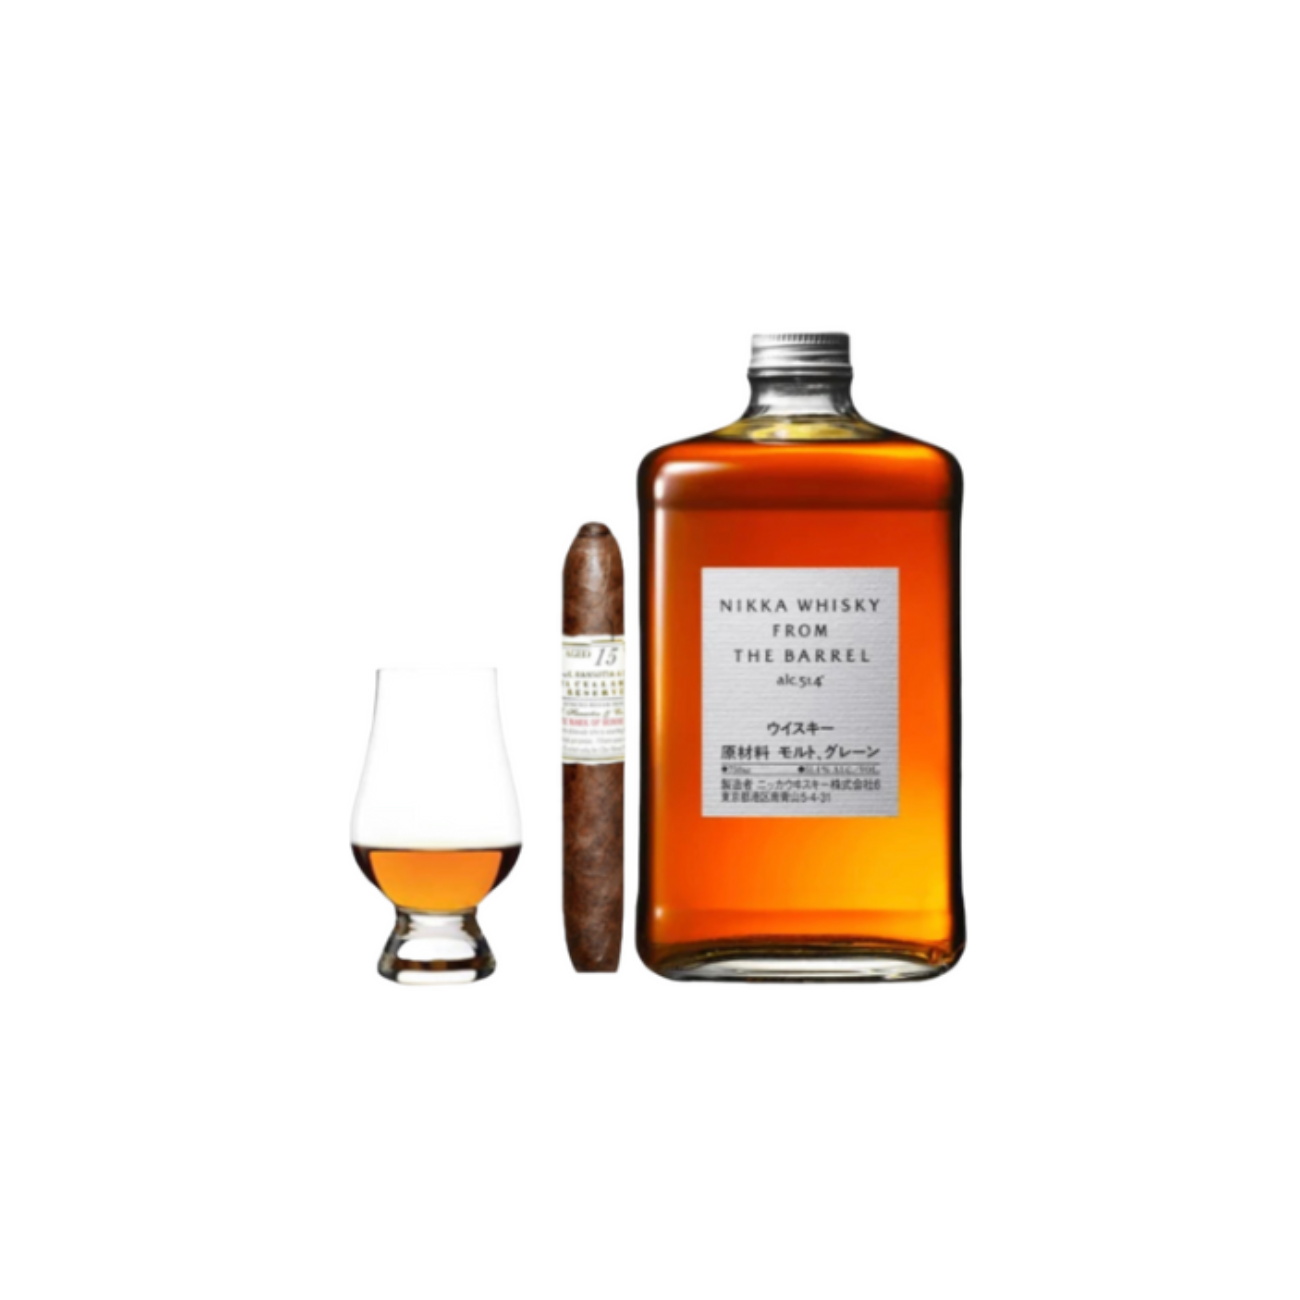 Nikka from the barrel gift set